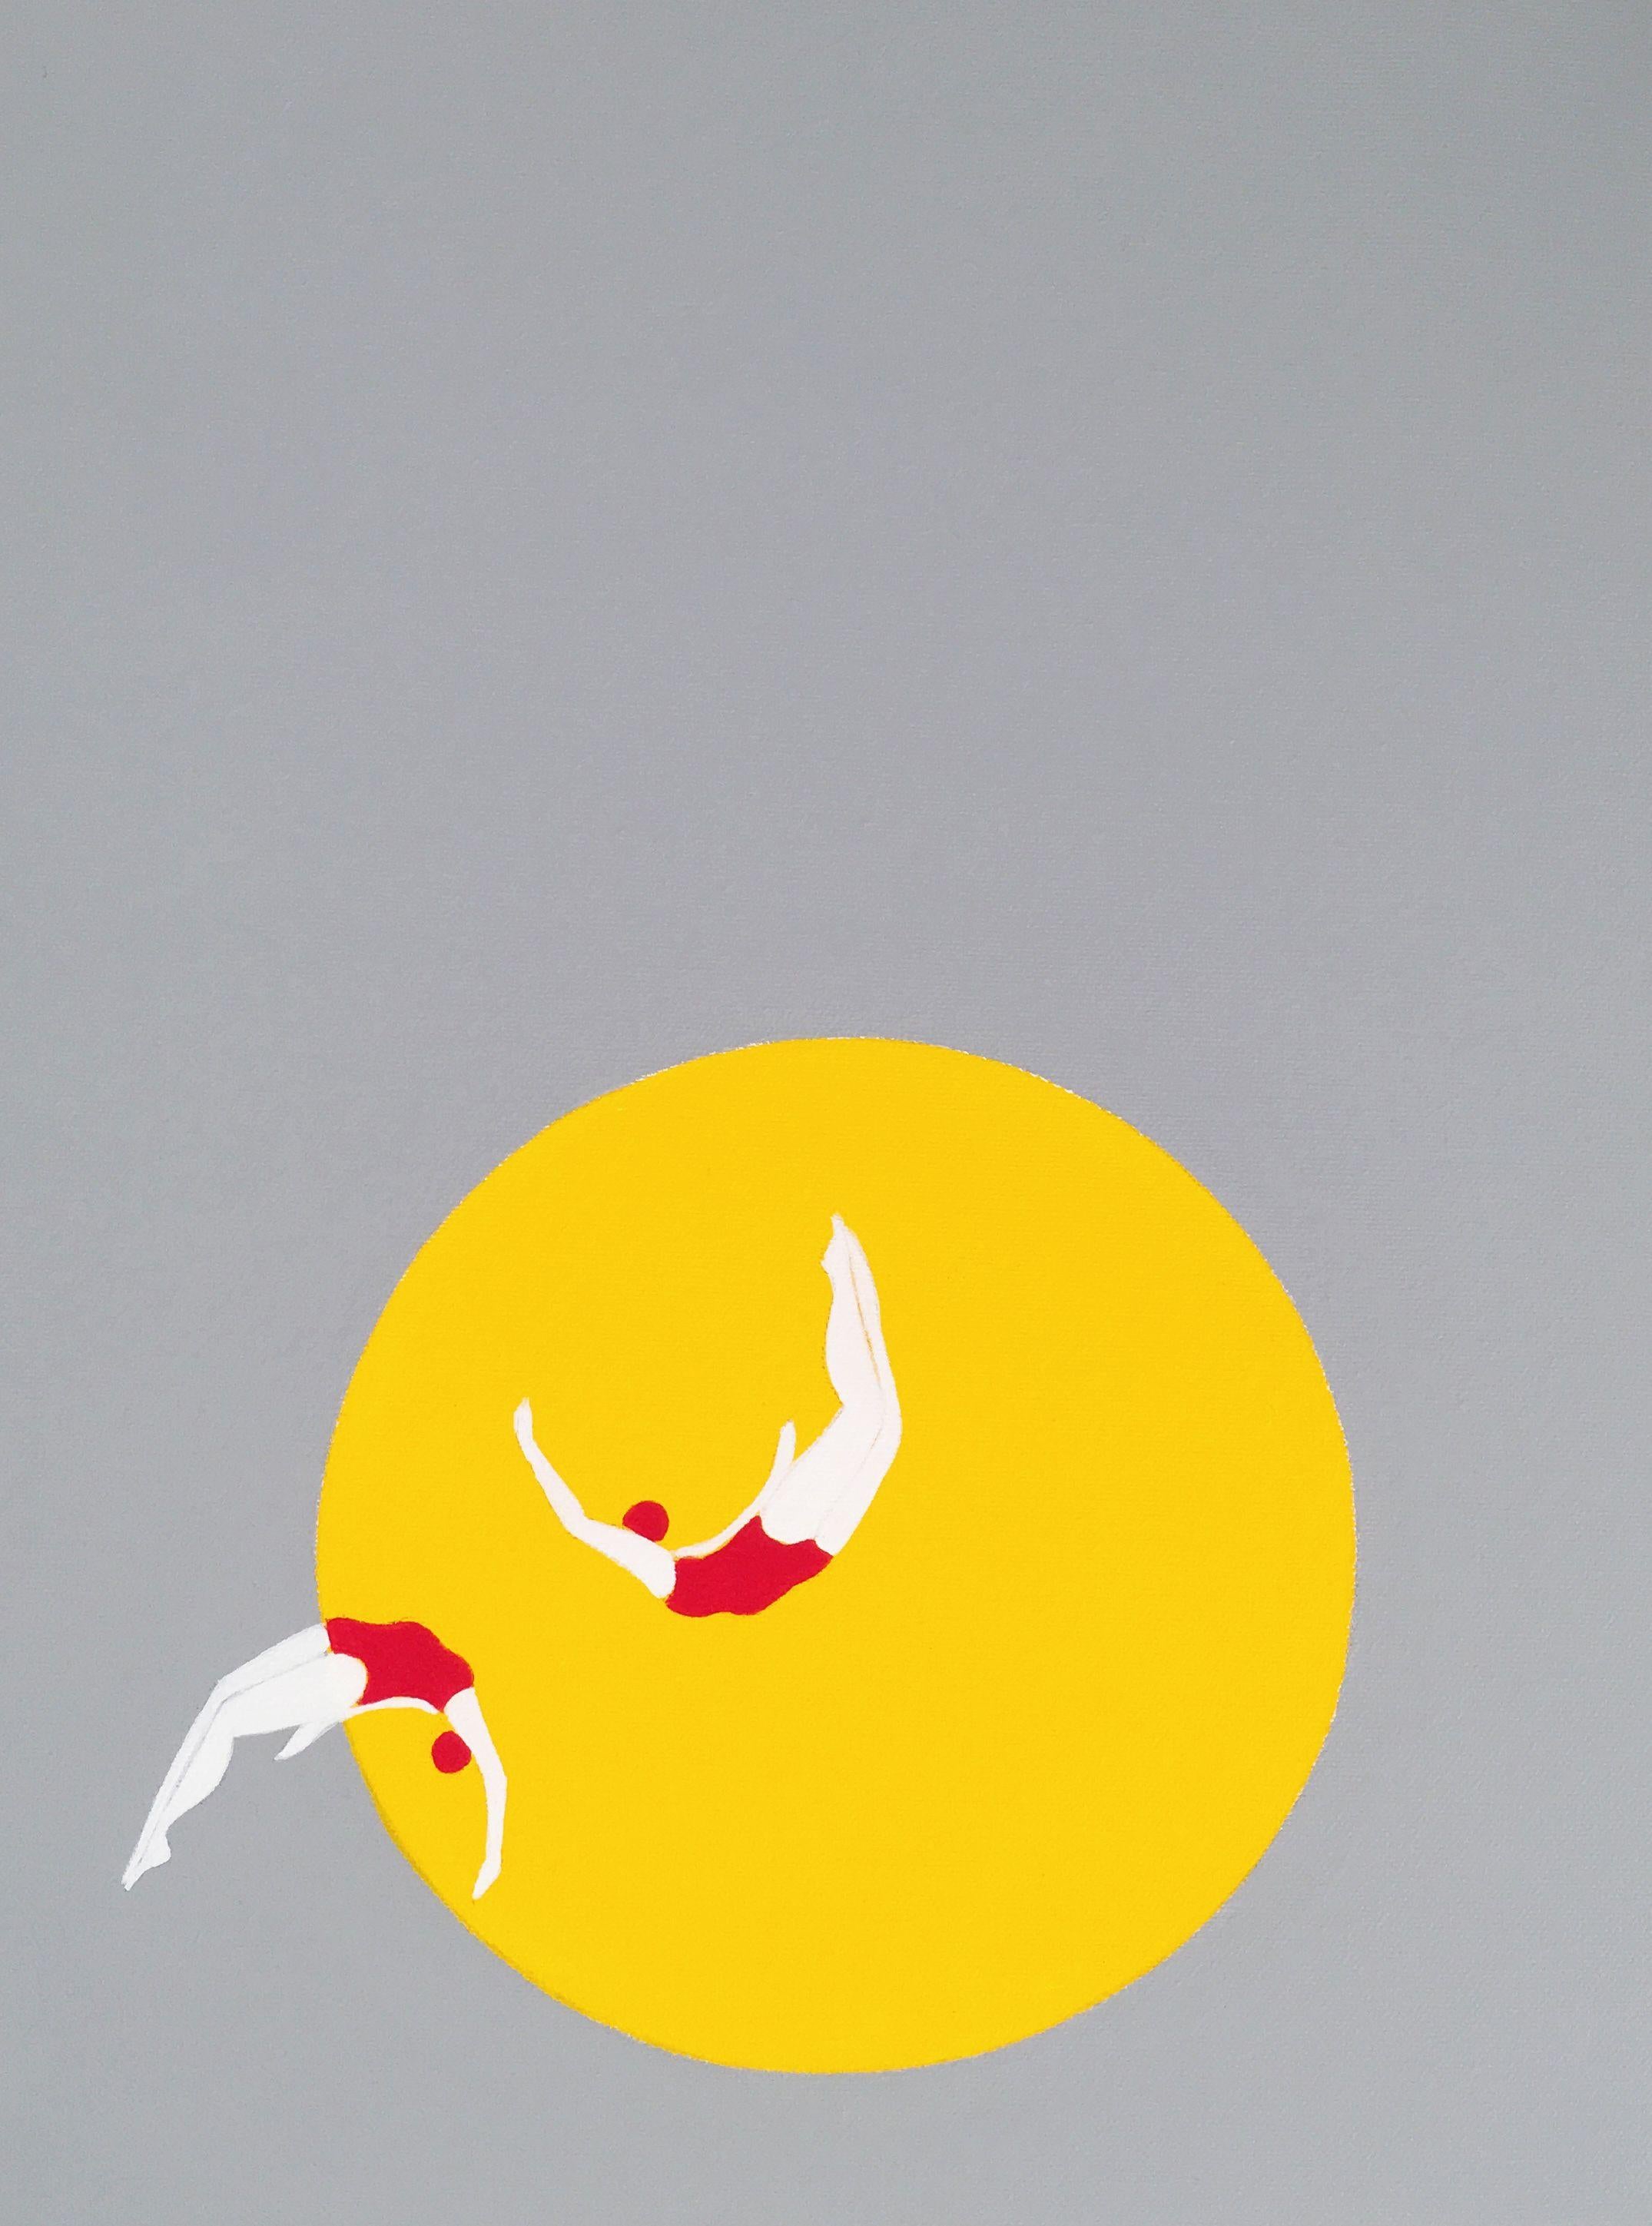 Painting: Acrylic on Canvas.    This painting depicts two of my divers swimming on a yellow sun onto a grey background. This piece is inspired by bird migration, translated into a ballet where my divers express their abilities to turn a fall into a